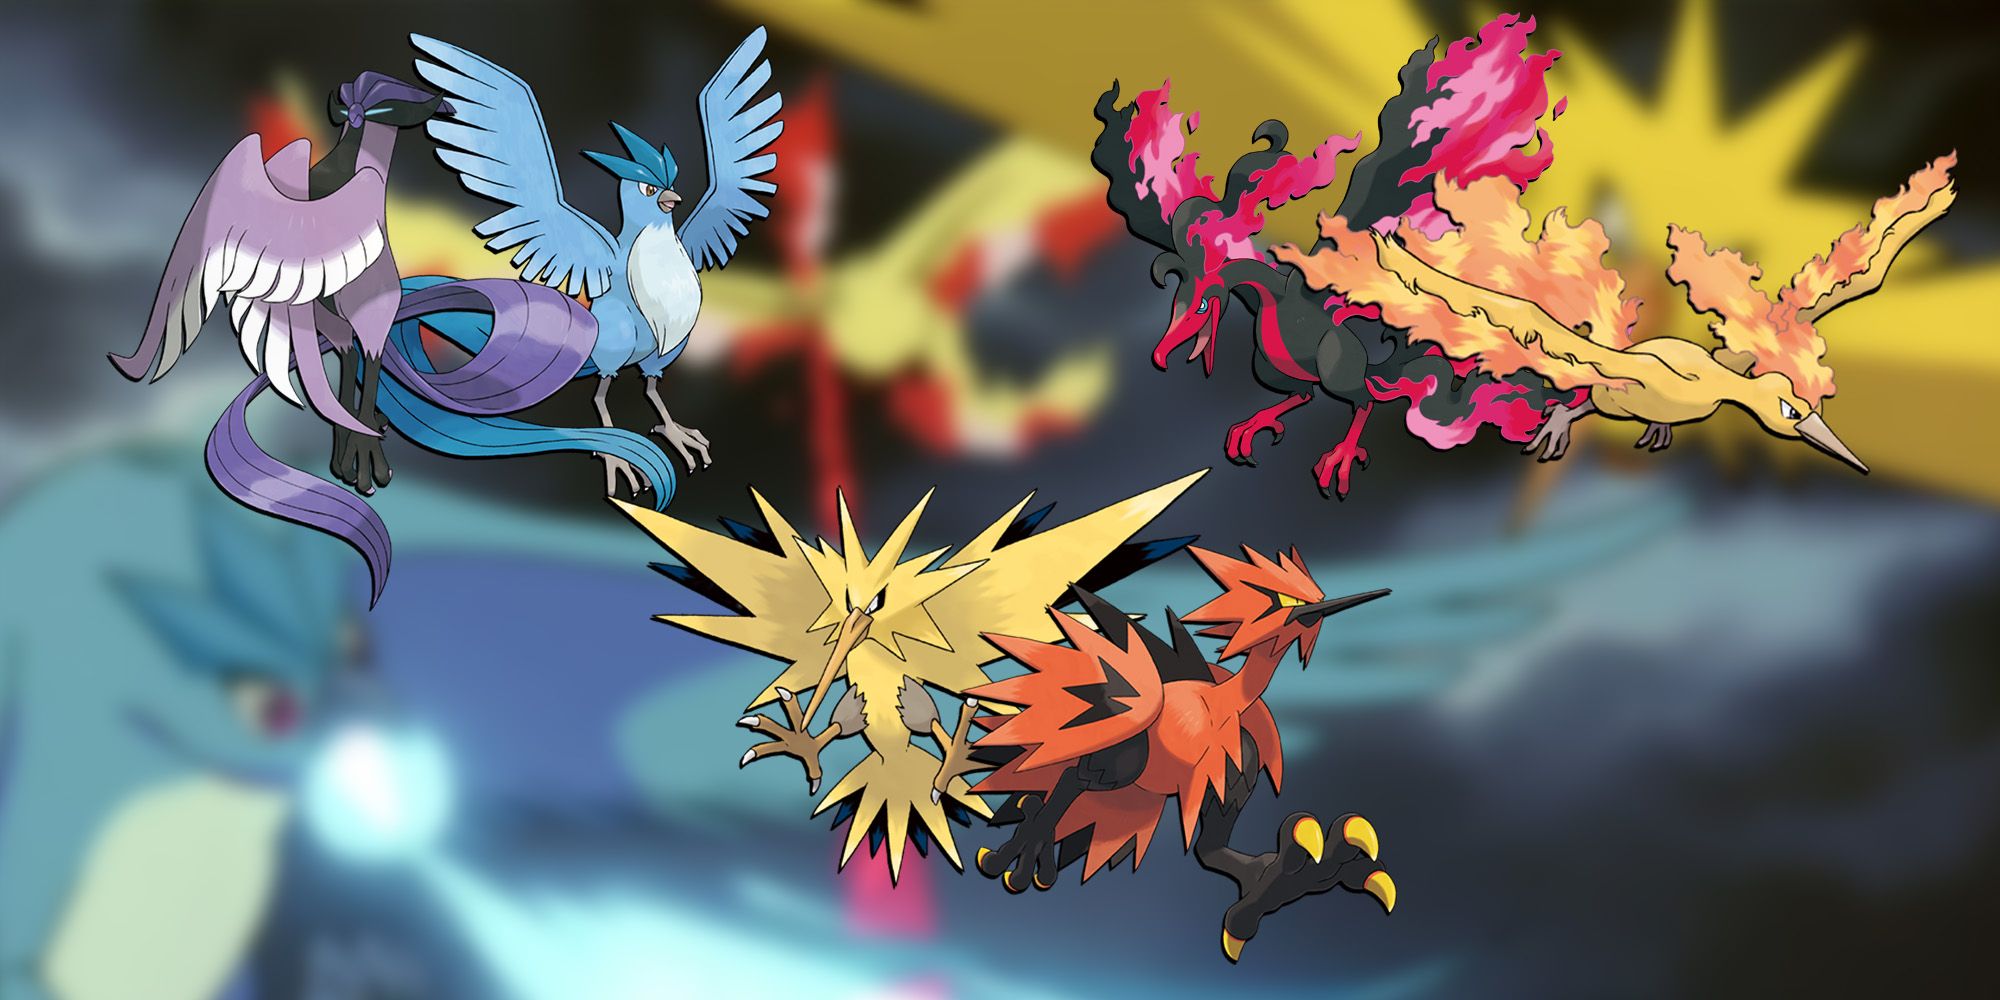 Pokemon - All Legendary Birds and their forms over image of 3 Legendary Birds as they appear in the anime